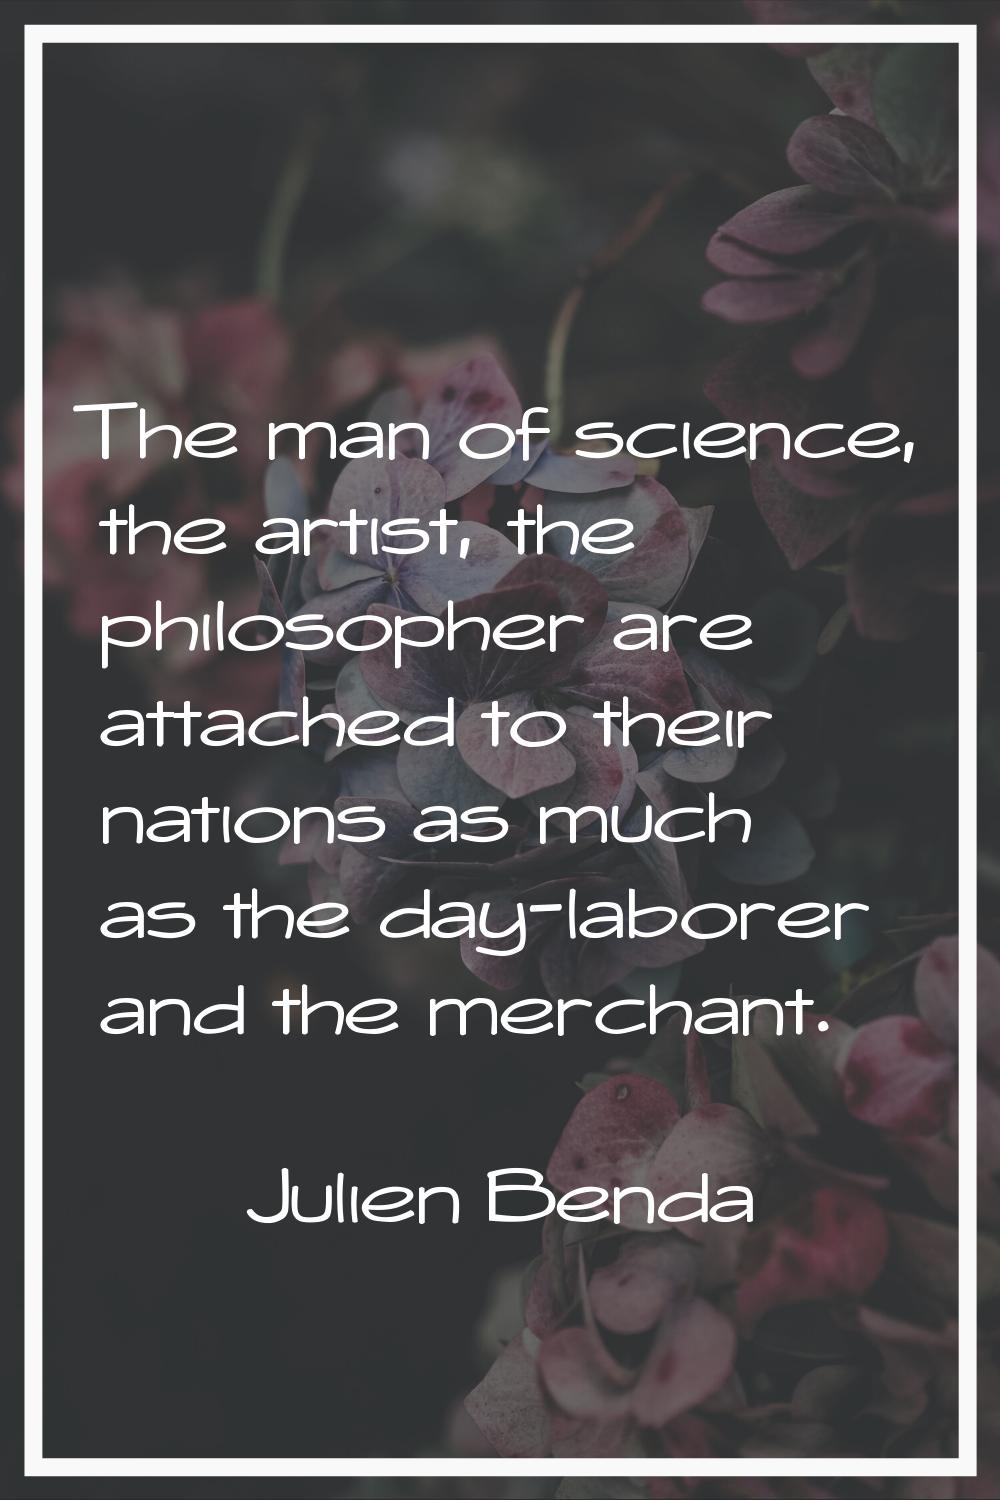 The man of science, the artist, the philosopher are attached to their nations as much as the day-la